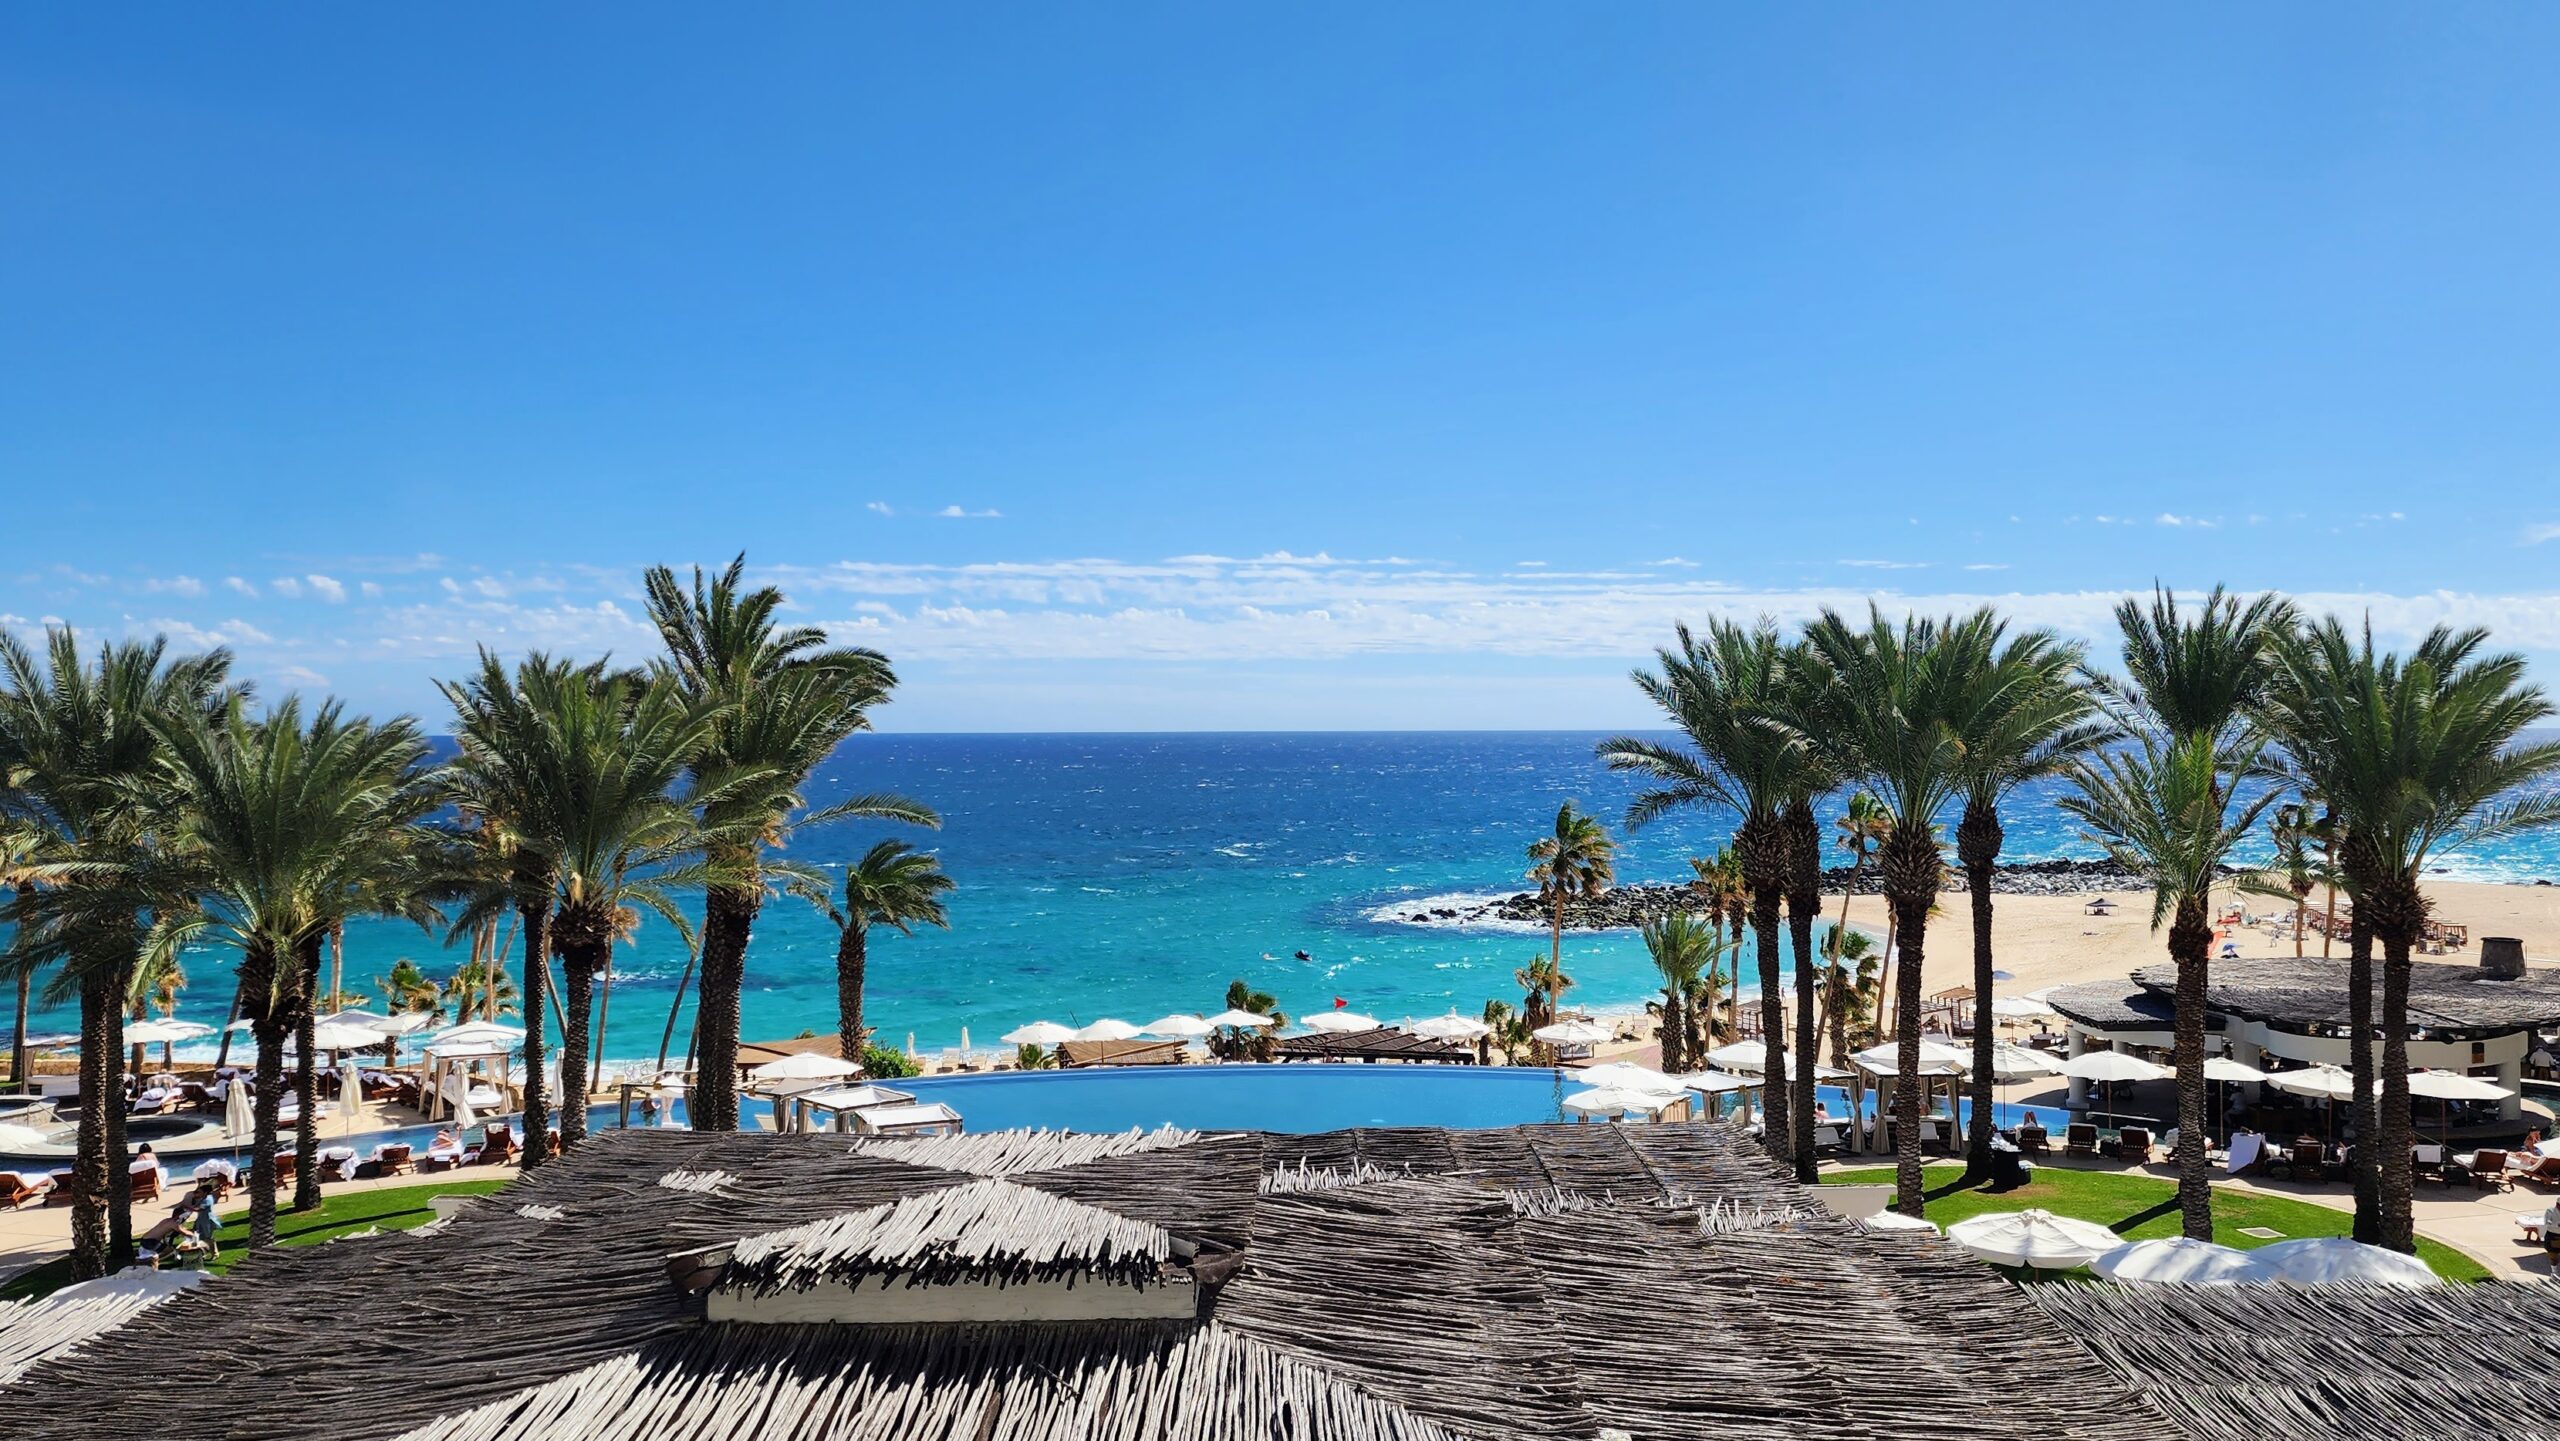 Hilton Los Cabos View of Pool and the Sea of Cortez